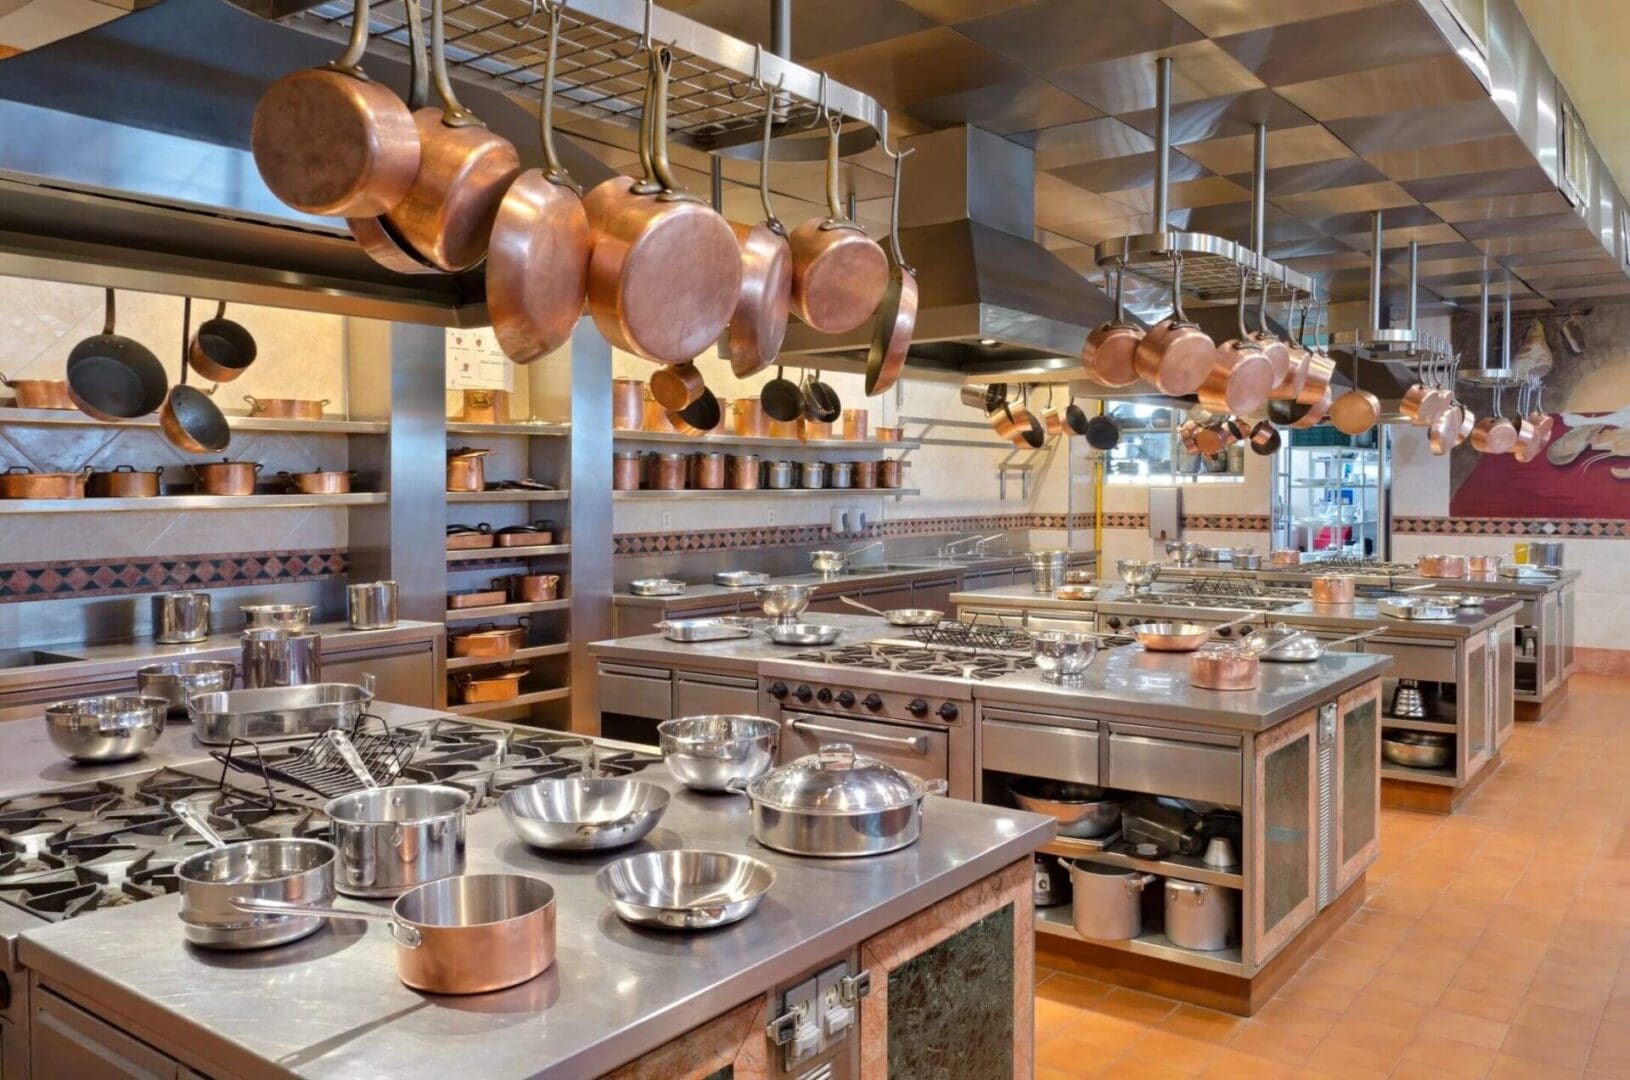 A large kitchen with many pots and pans hanging from the ceiling.